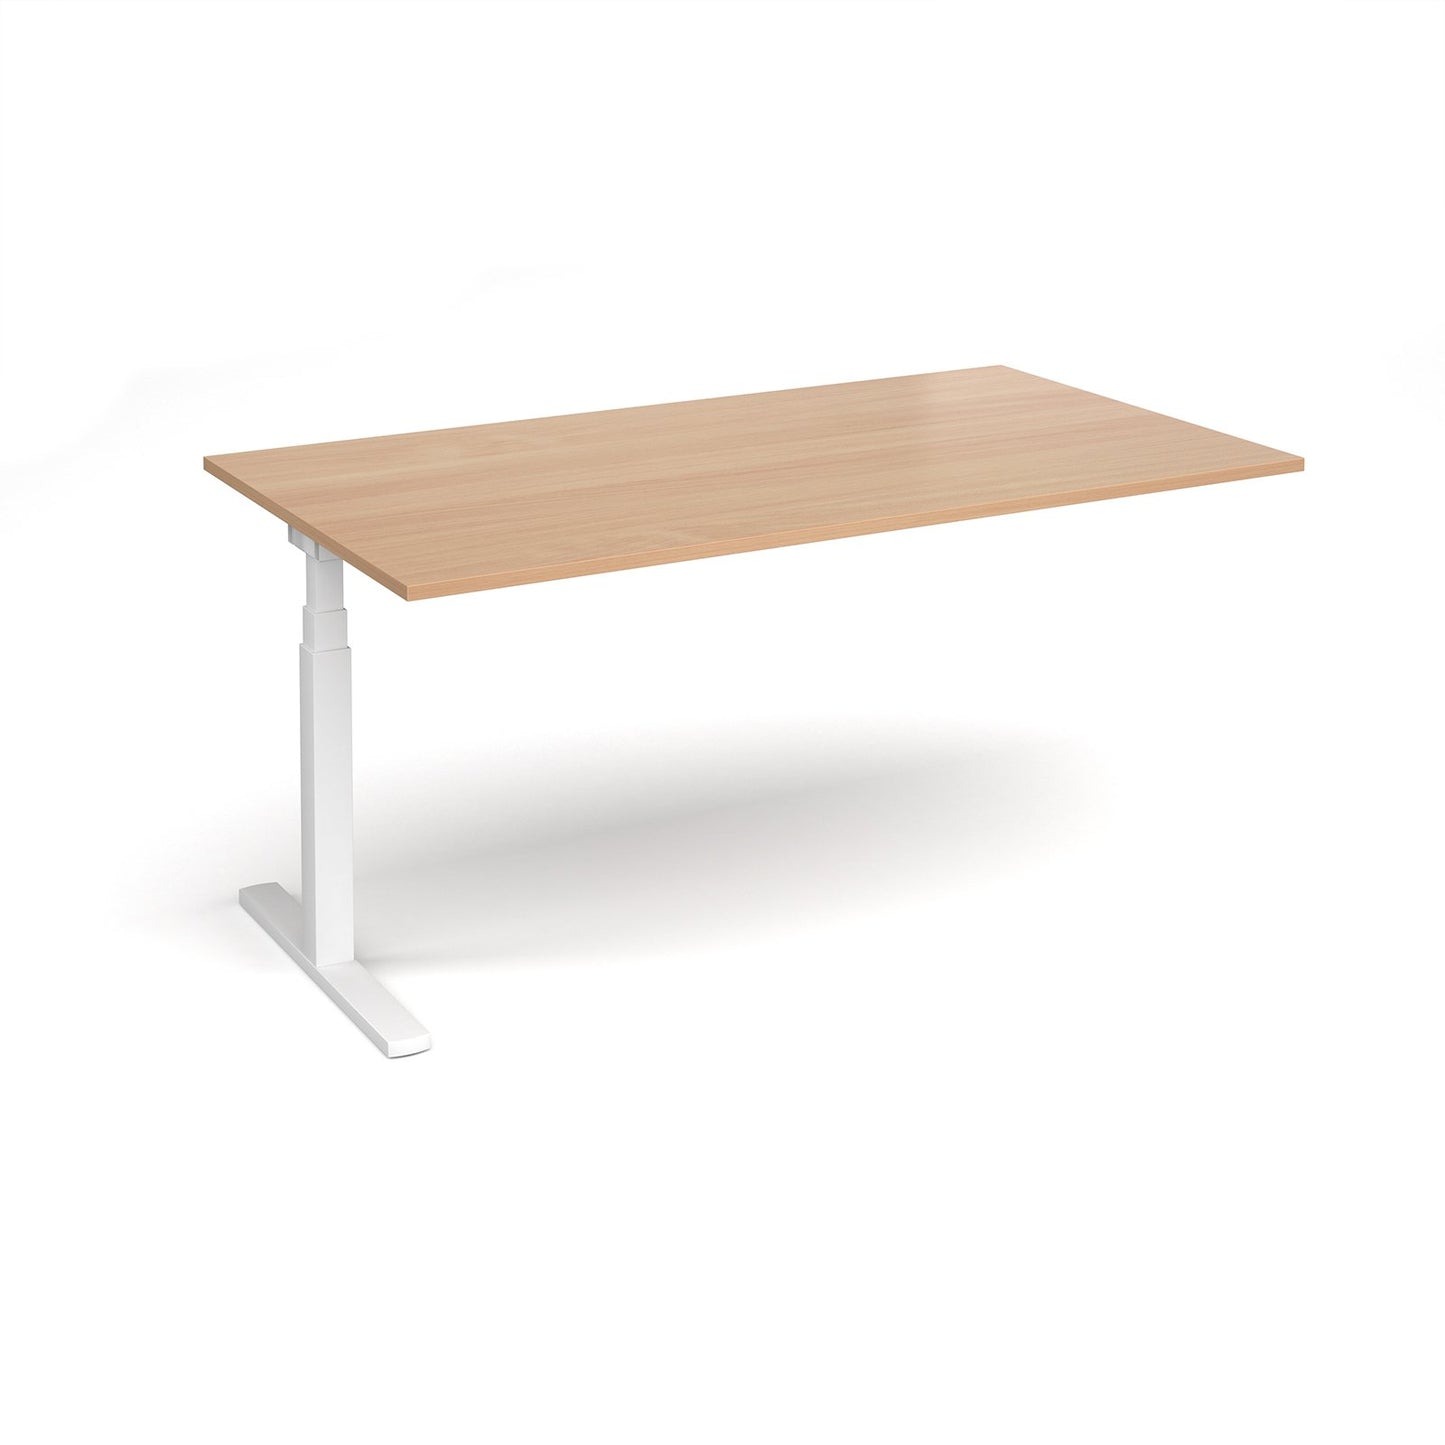 Elev8 Touch boardroom table add on unit